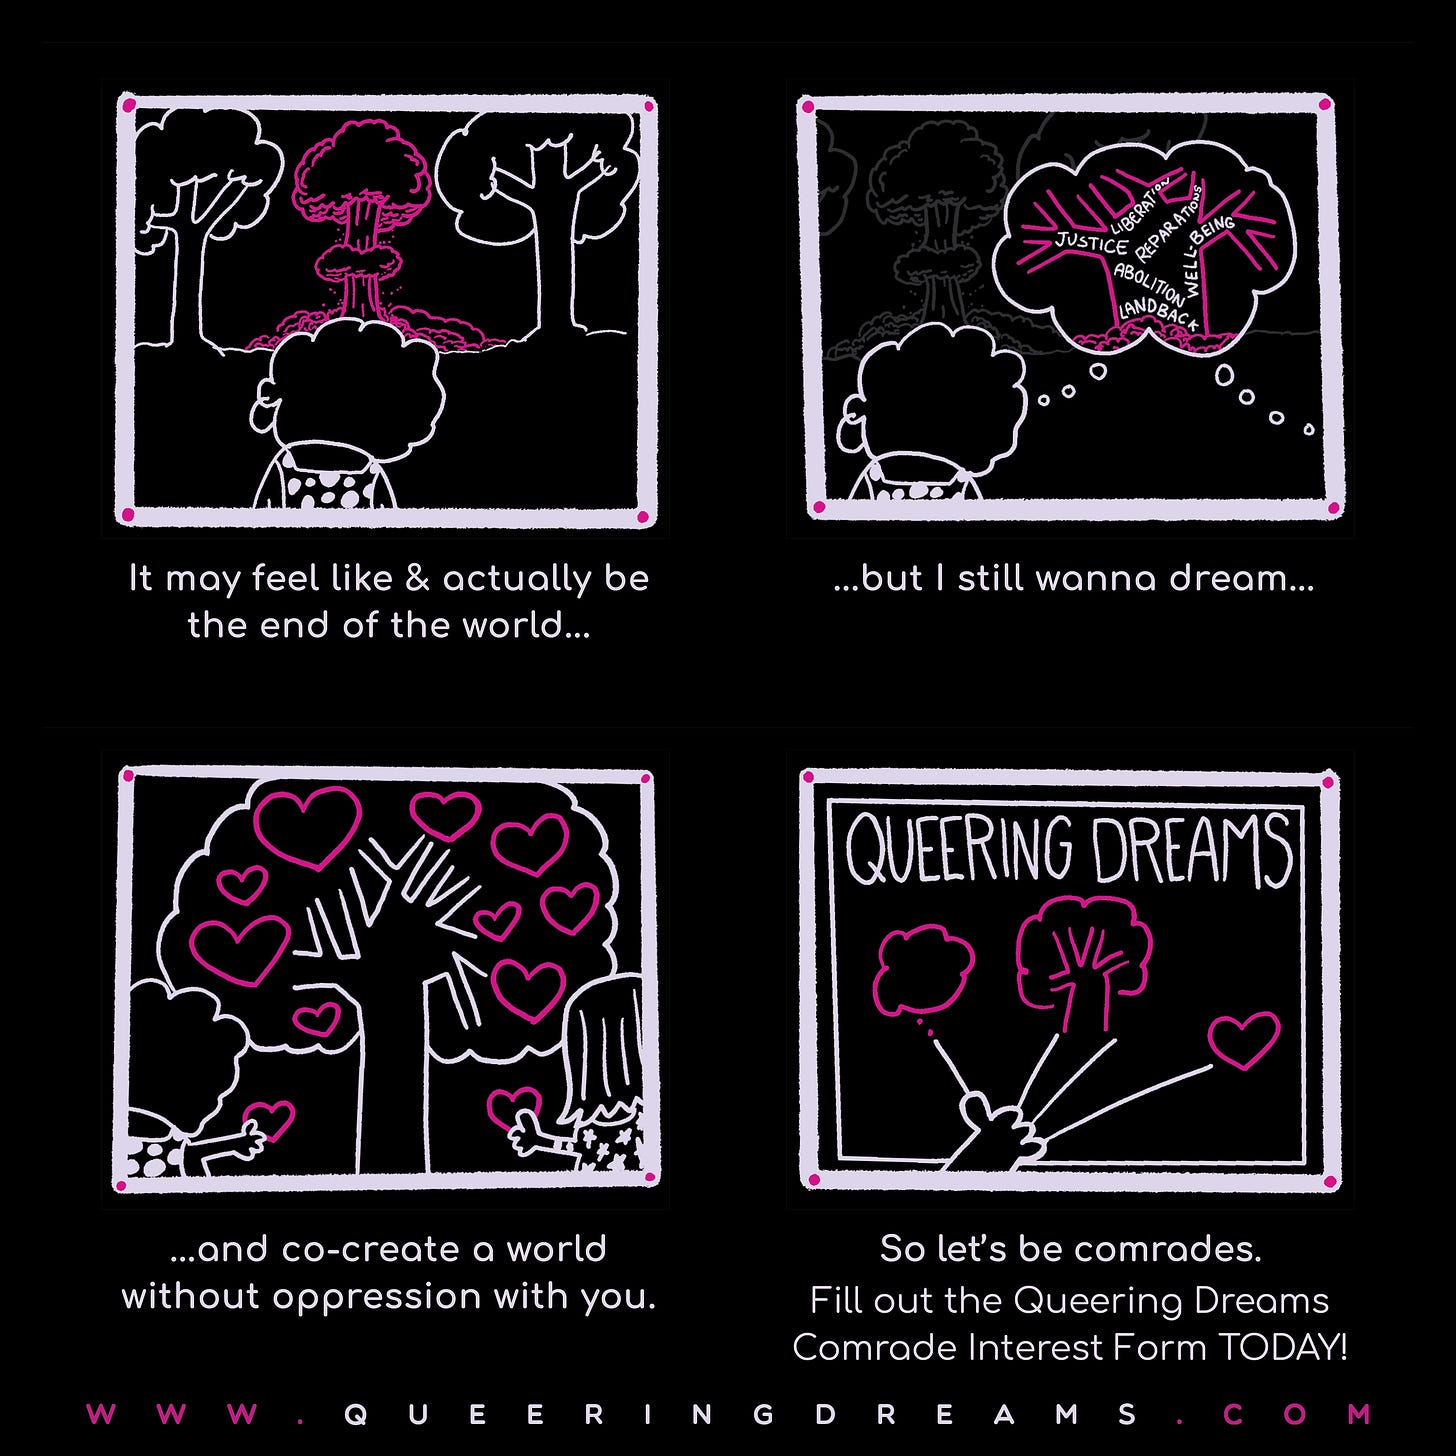 A cartoon of a queer character in four panels. Panel one is them looking at an atomic blast between two trees. Underneath the panel it reads, It may feel like & actually be the end of the world.... Panel two is them dreaming a tree with the words Justice, Liberation, Abolition,  Land Back, Reparations with the nuclear blast in gray. Underneath it reads, ...but I still wanna dream.... Panel 4 is them and another person holding hearts with a tree full of hearts before them. Underneath it it reads, ...and co-create a world without oppression with you. Panel 4 is Queering Dreams with a hand reaching up connected to an icon for dreaming, a tree, and a heart. Underneath it it reads, So let's be comrades. Fill out the Queering Dreams Comrade Interest Form today. www.queeringdreams.com